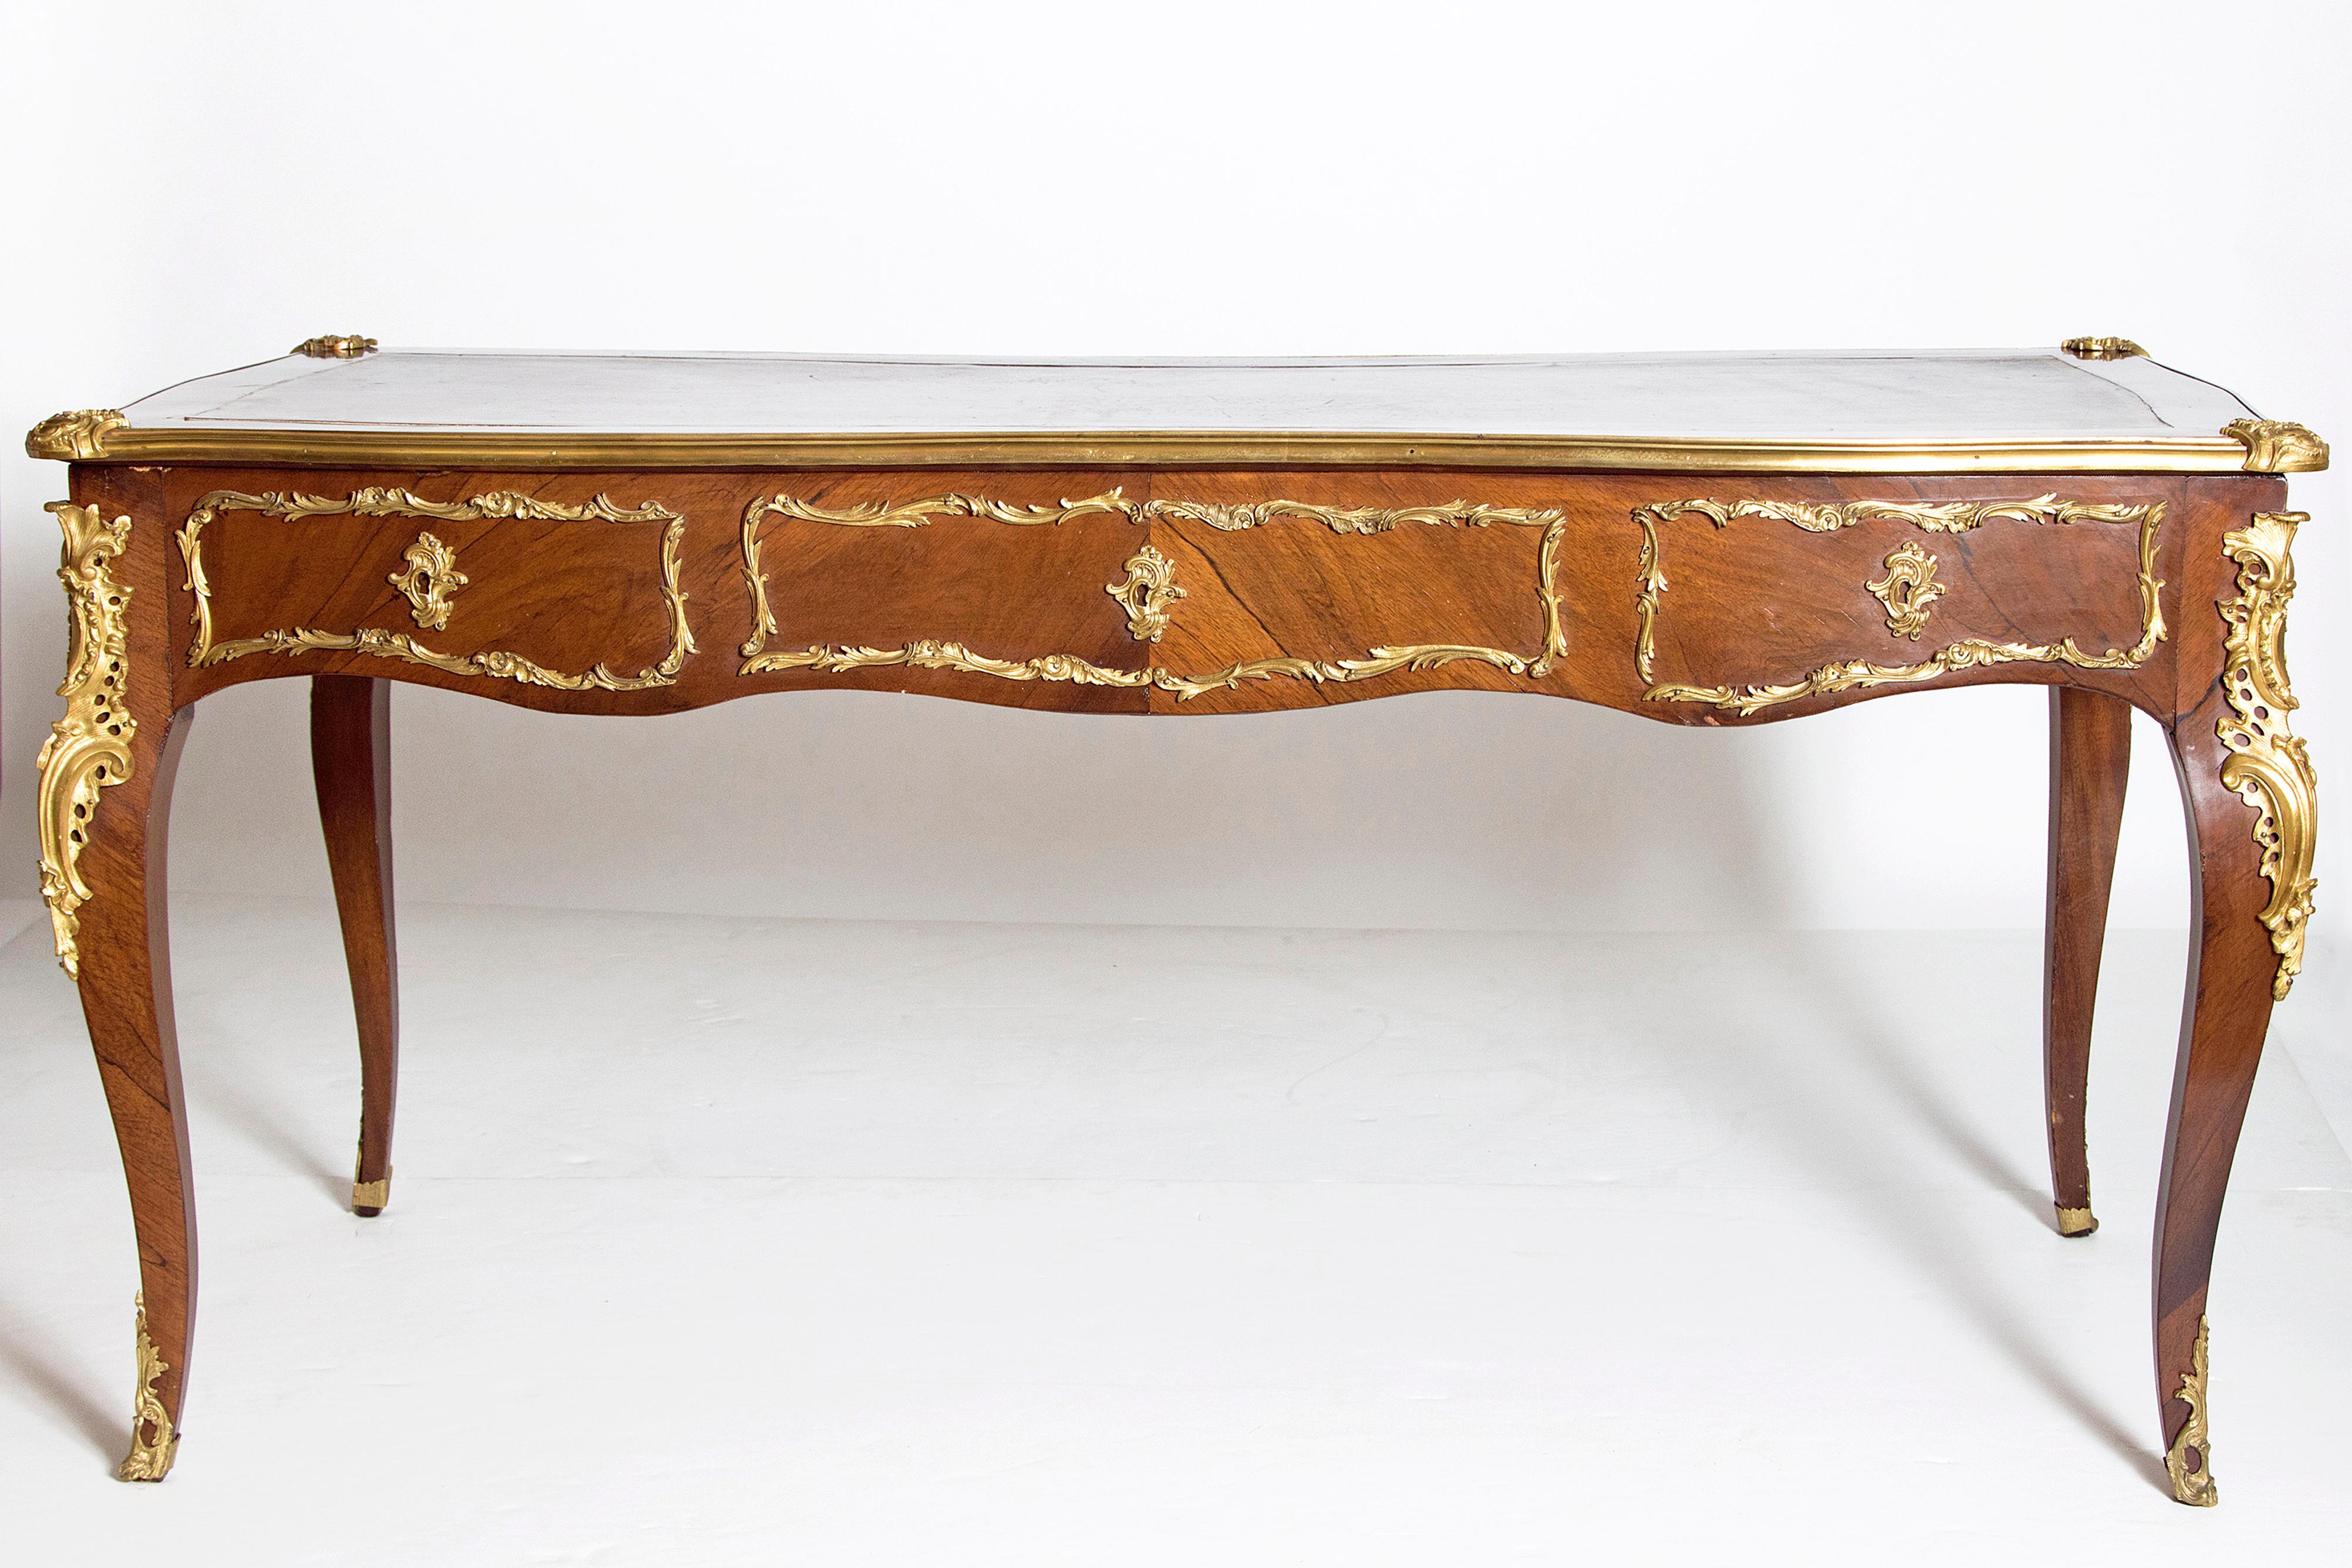 A elegant French late 19th century Louis XV style rosewood and ormolu bureau plat. The top is a gilt tooled shaped leather fitted within a veneer border surrounded by an ormolu galley with foliate ormolu mounts at each corner. Below the frieze